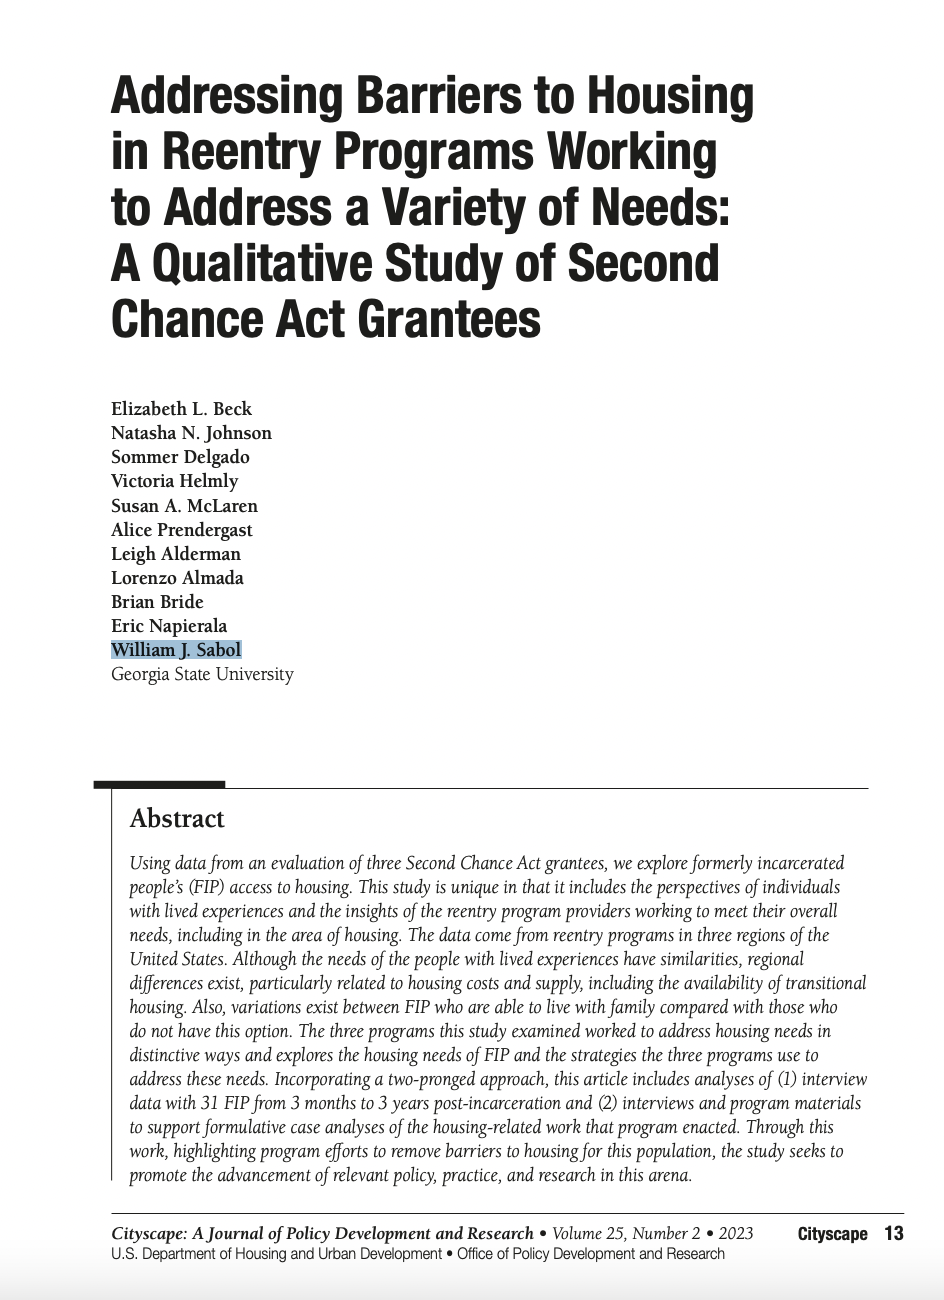 Addressing Barriers to Housing in Reentry Programs: A Qualitative Study of Second Chance Act Grantees